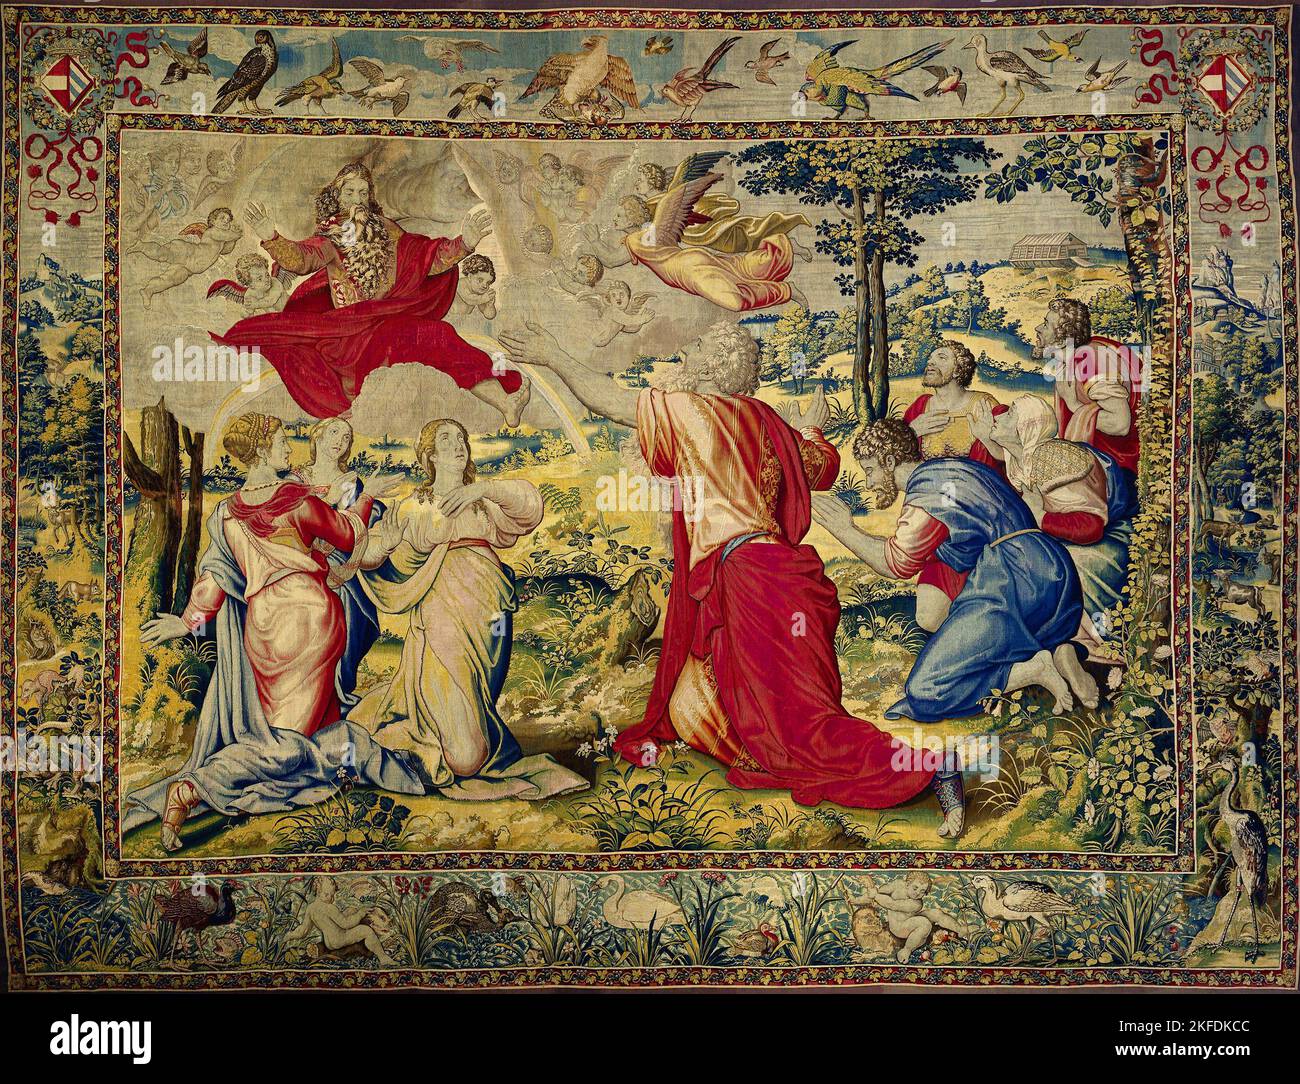 Belgium: 'God Blesses Noah and his Family'. Wool and silk tapestry by Willem de Pannemaker (c. 1512/1514-1581) and Michiel Coxie (14 March 1499 - 10 March 1592), c. 1570.  In this tale from the Hebrew Bible, or the Old Testament of the Christian Bible, God was dissatisfied with the sins of mankind and he decided to purge the earth of every person except the righteous Noah and his wife.  God instructed Noah to build an ark and to save two of each earthly creature on board. Noah complied, and as soon as the ark was built, God flooded the earth and killed everyone except Noah and his wife. Stock Photo